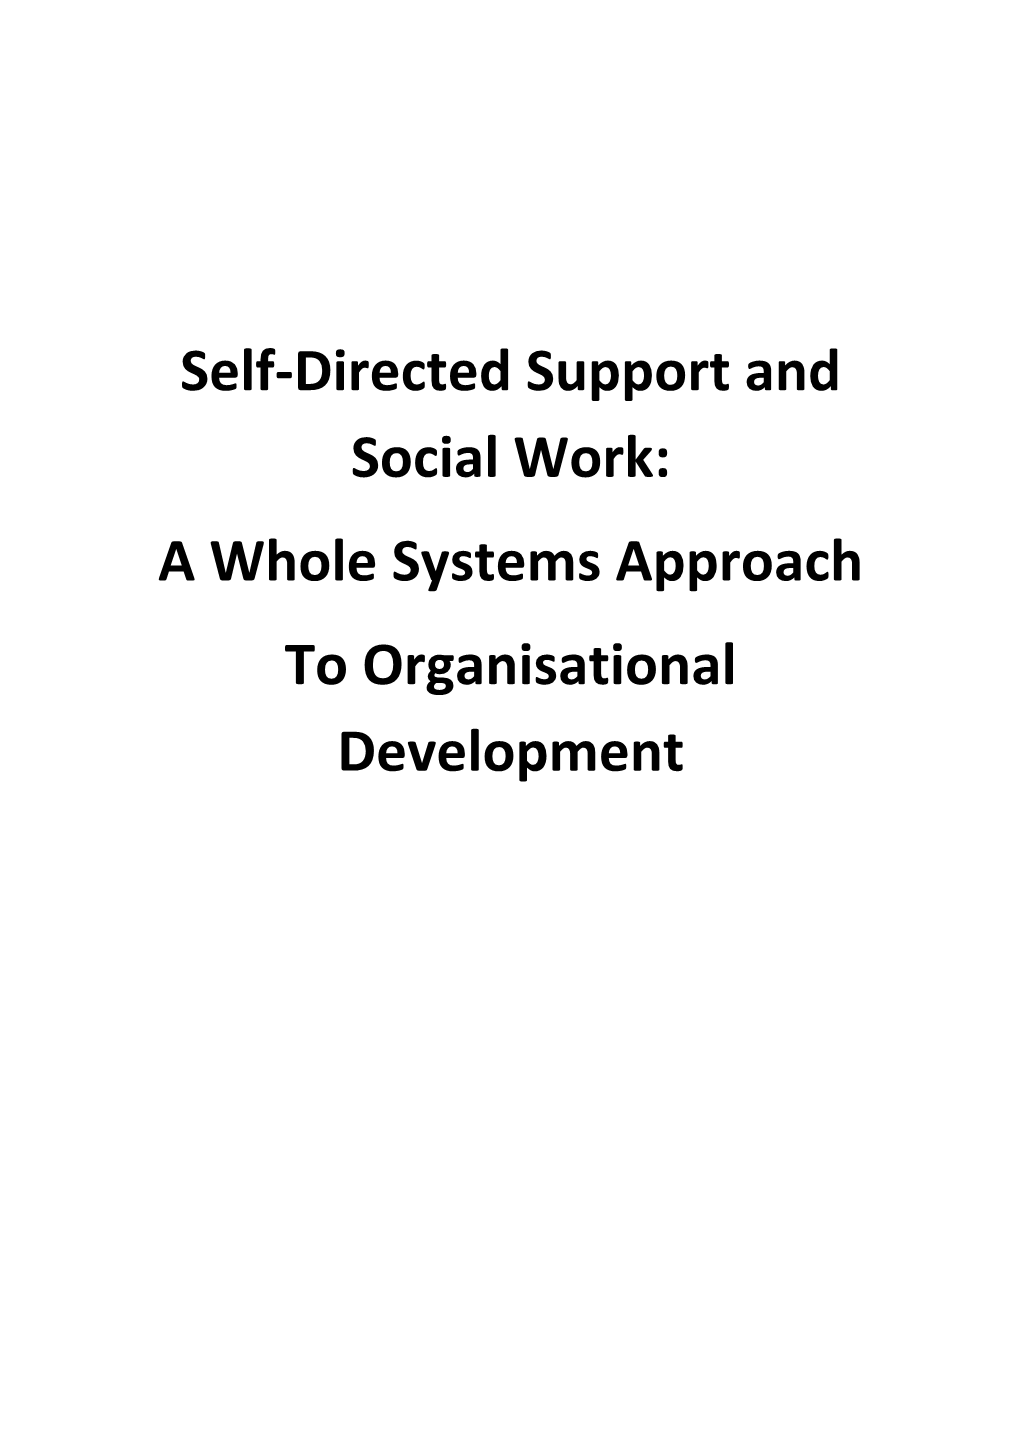 Self-Directed Support and Social Work